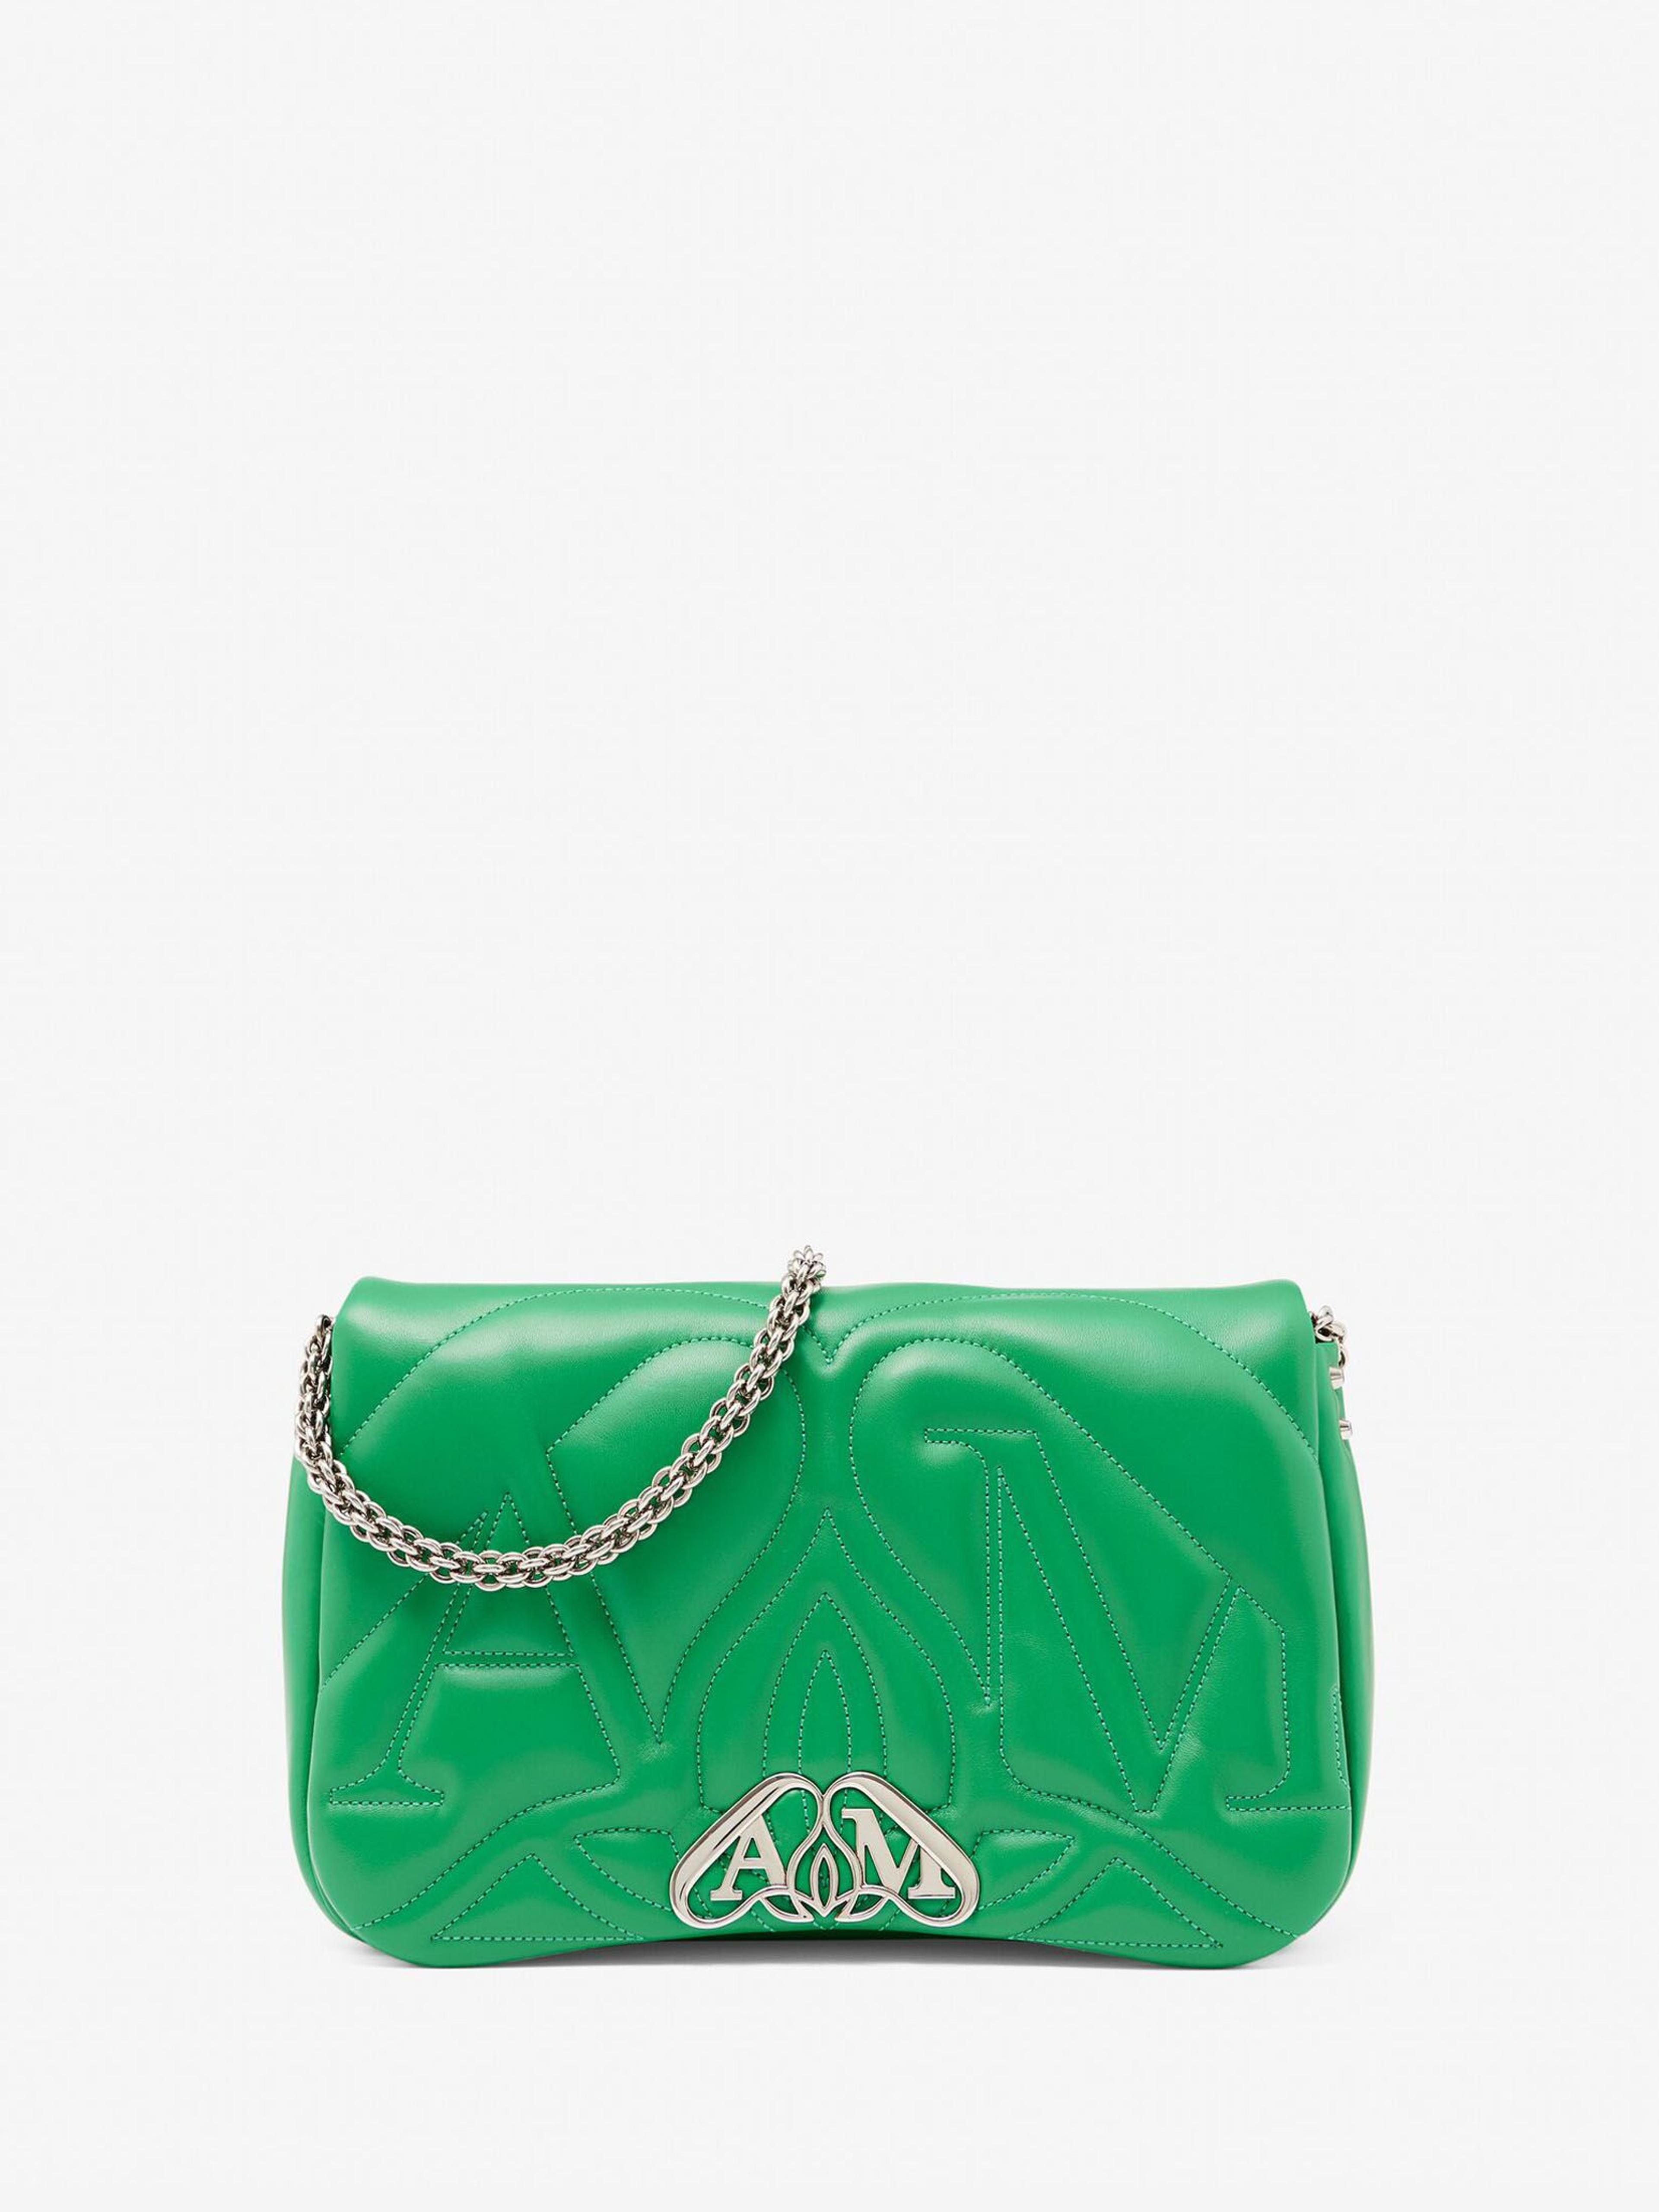 The Seal Bag in Bright Green | Alexander McQueen US